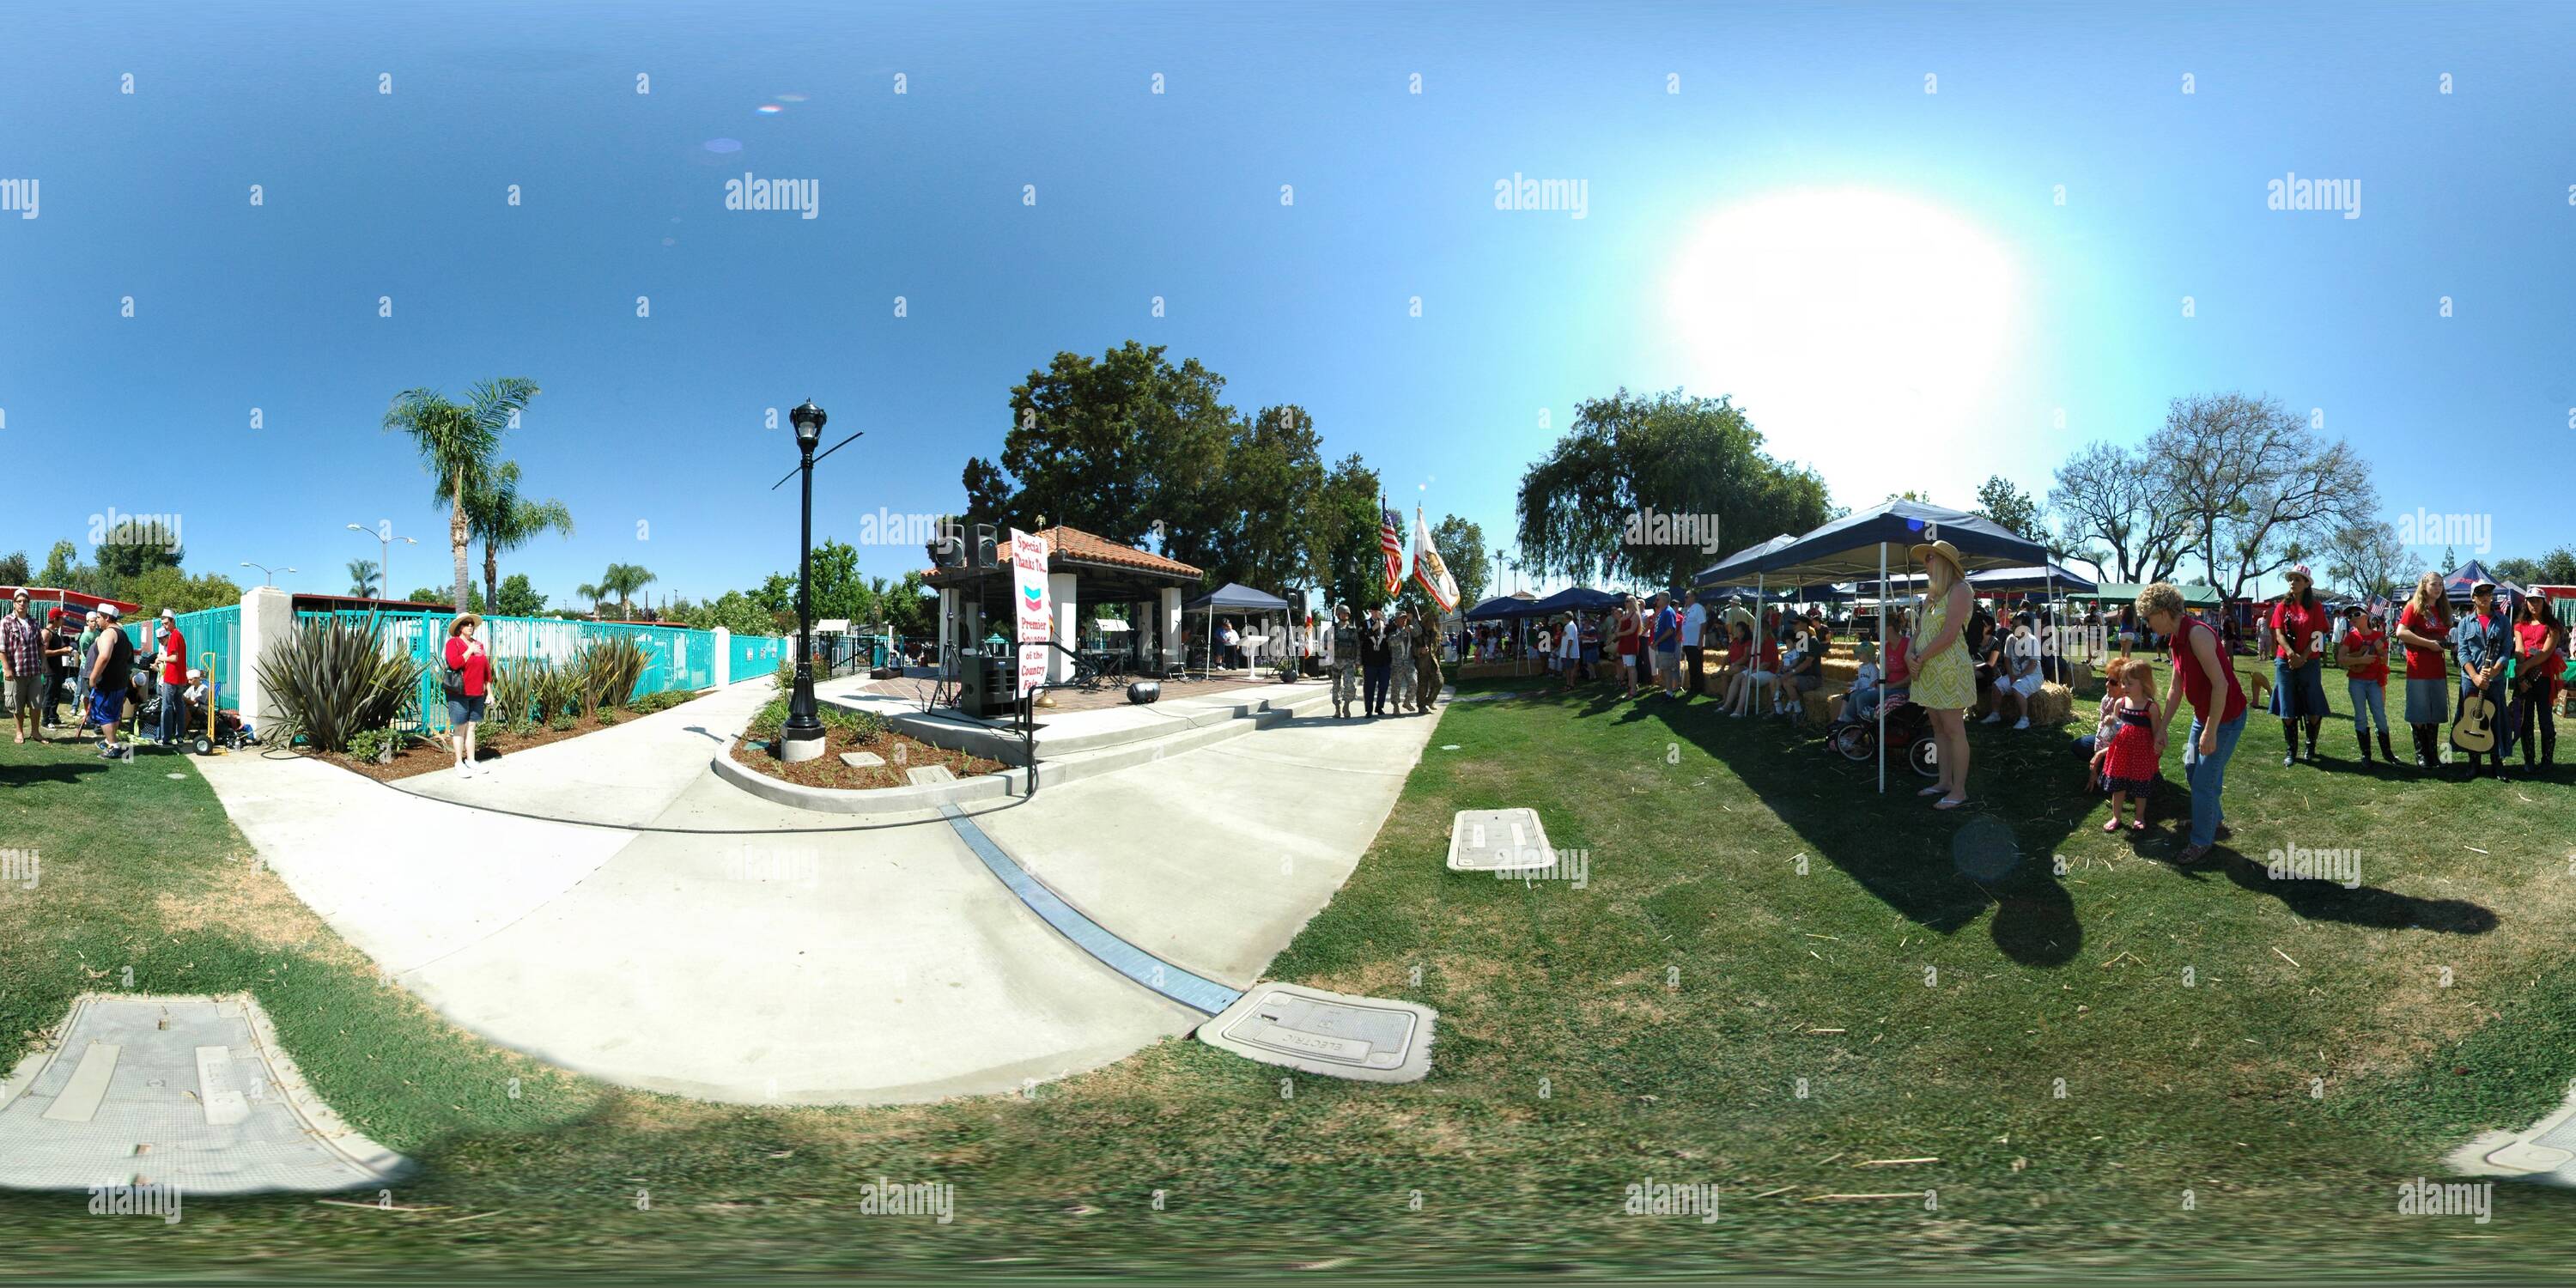 360° view of Brea Country Fair Alamy